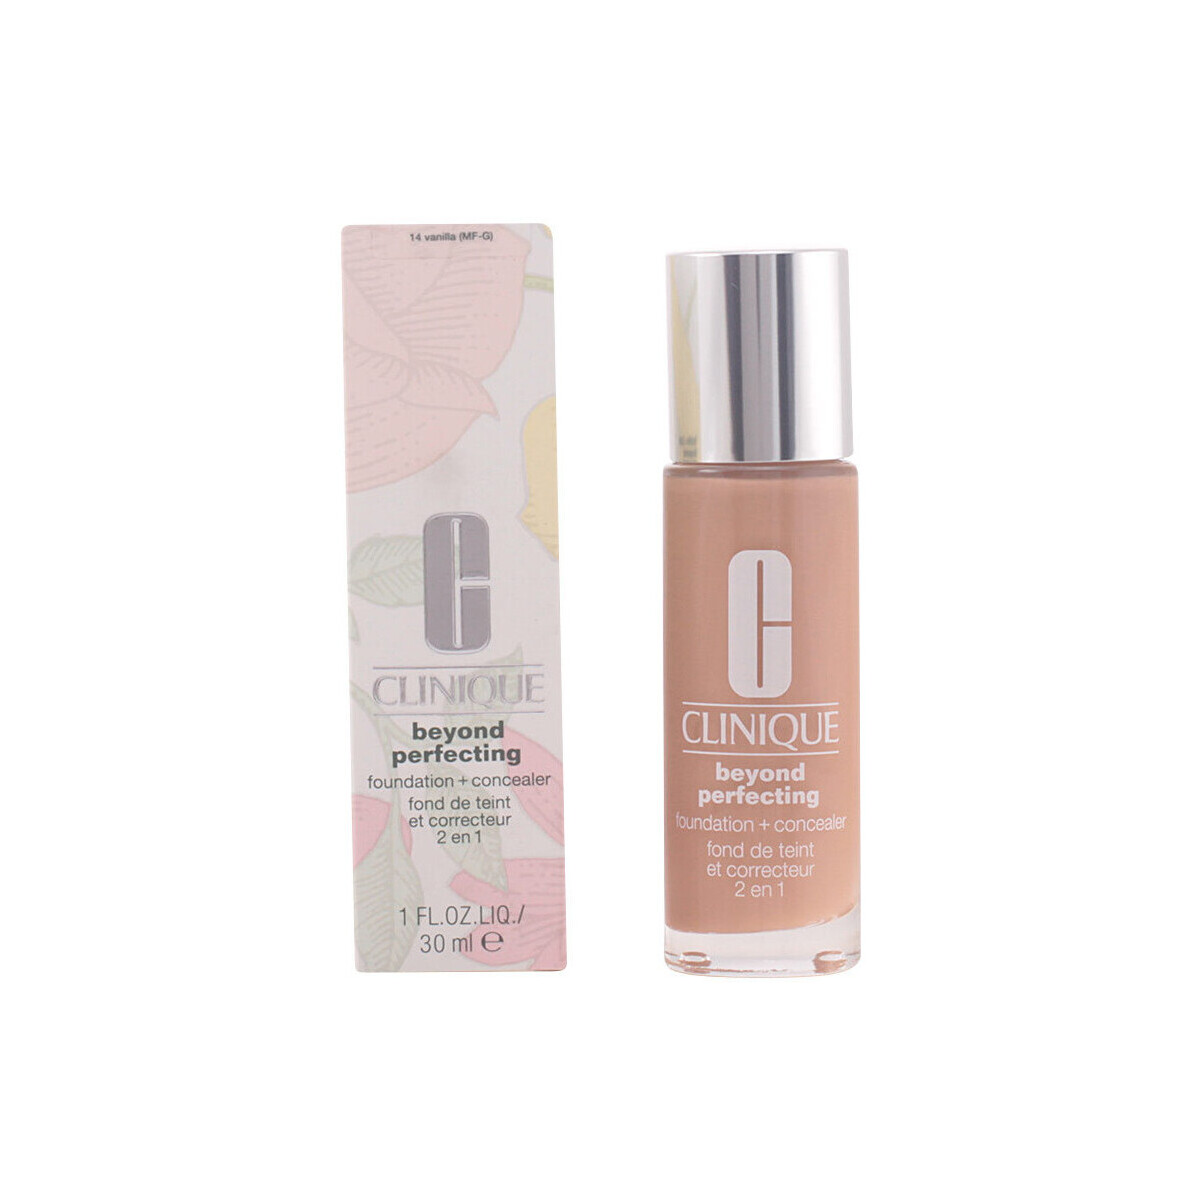 Beauty Make-up & Foundation  Clinique Beyond Perfecting Foundation + Concealer 14-vanilla 